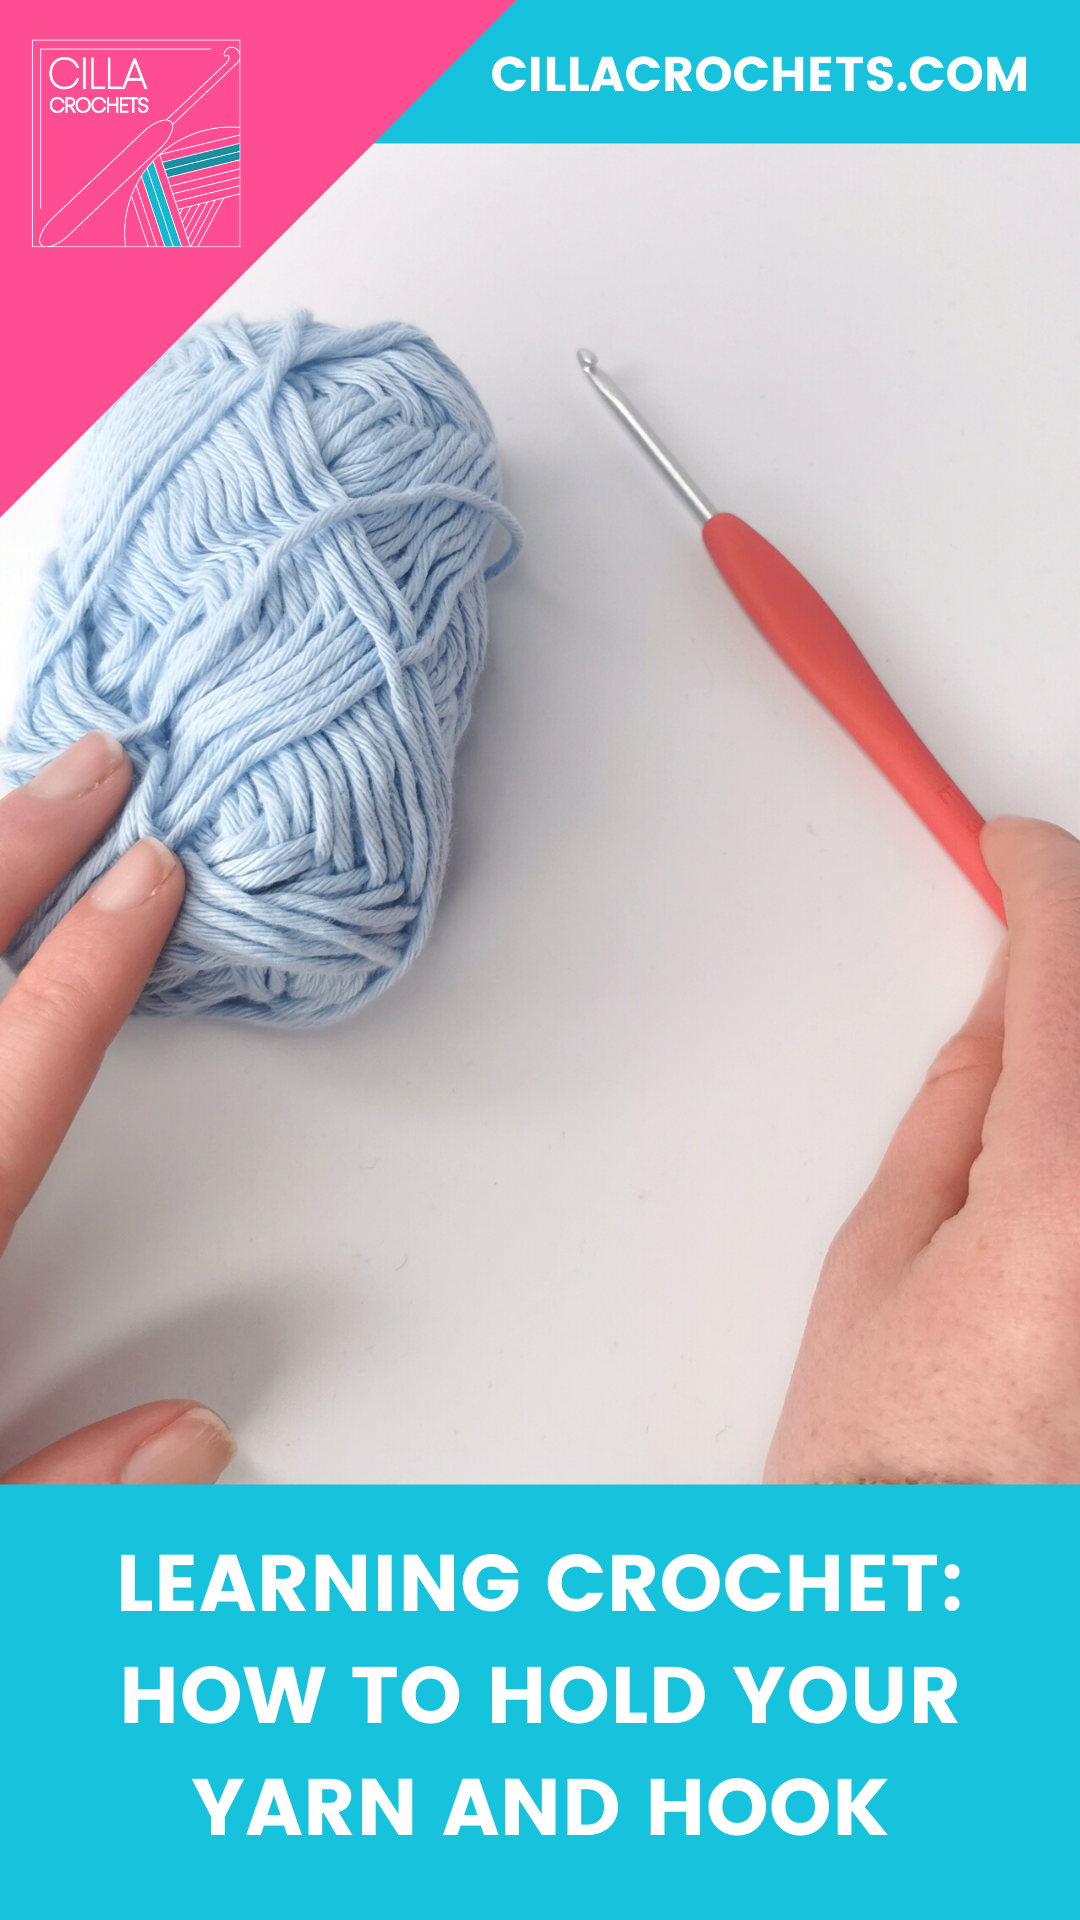 4 Ways to Hold Your Yarn When Crocheting - Crochet Tutorial